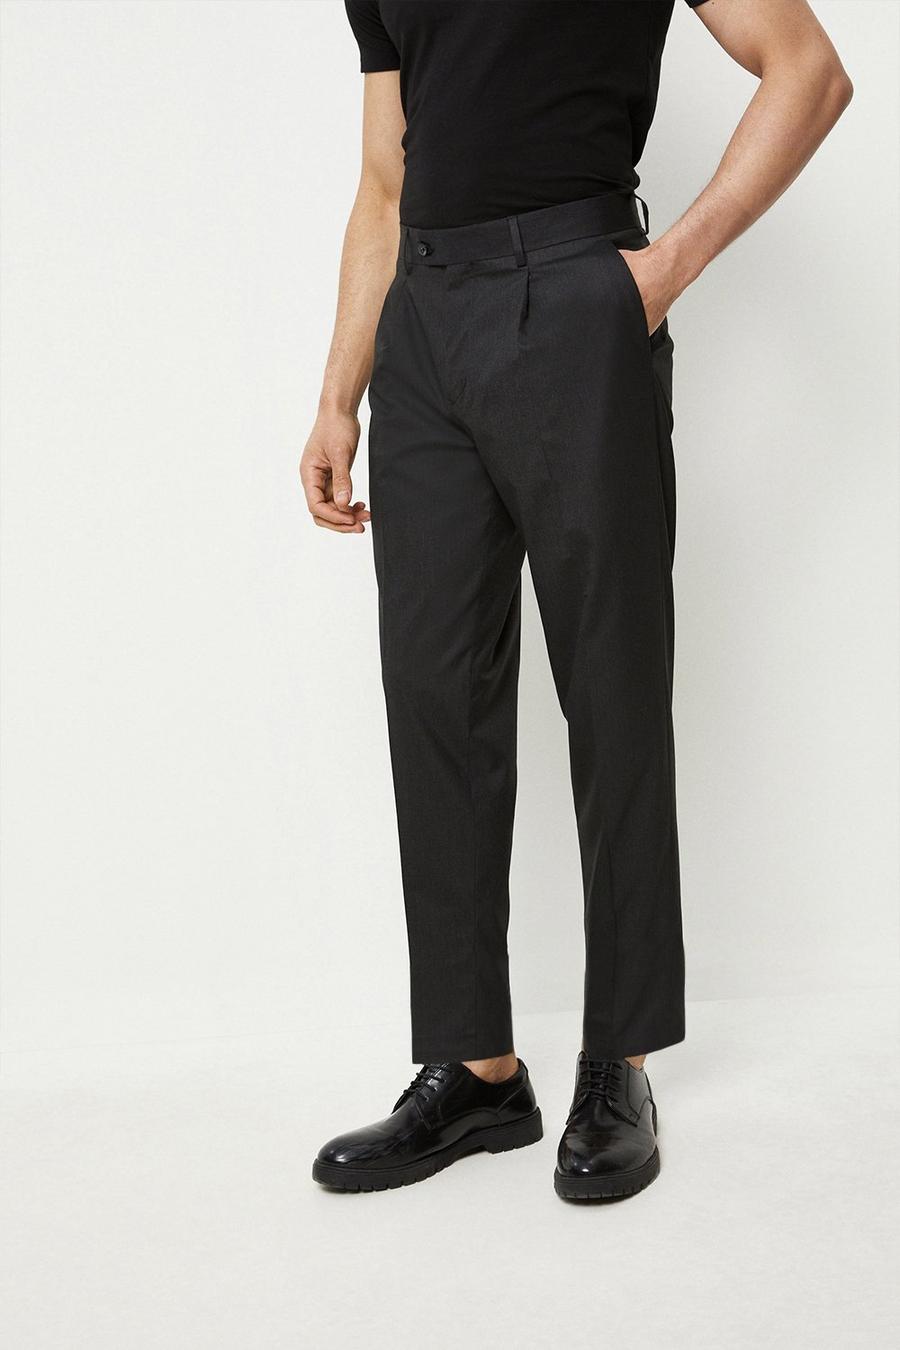 1904 Slim Tapered Fit Charcoal Suit Trouser